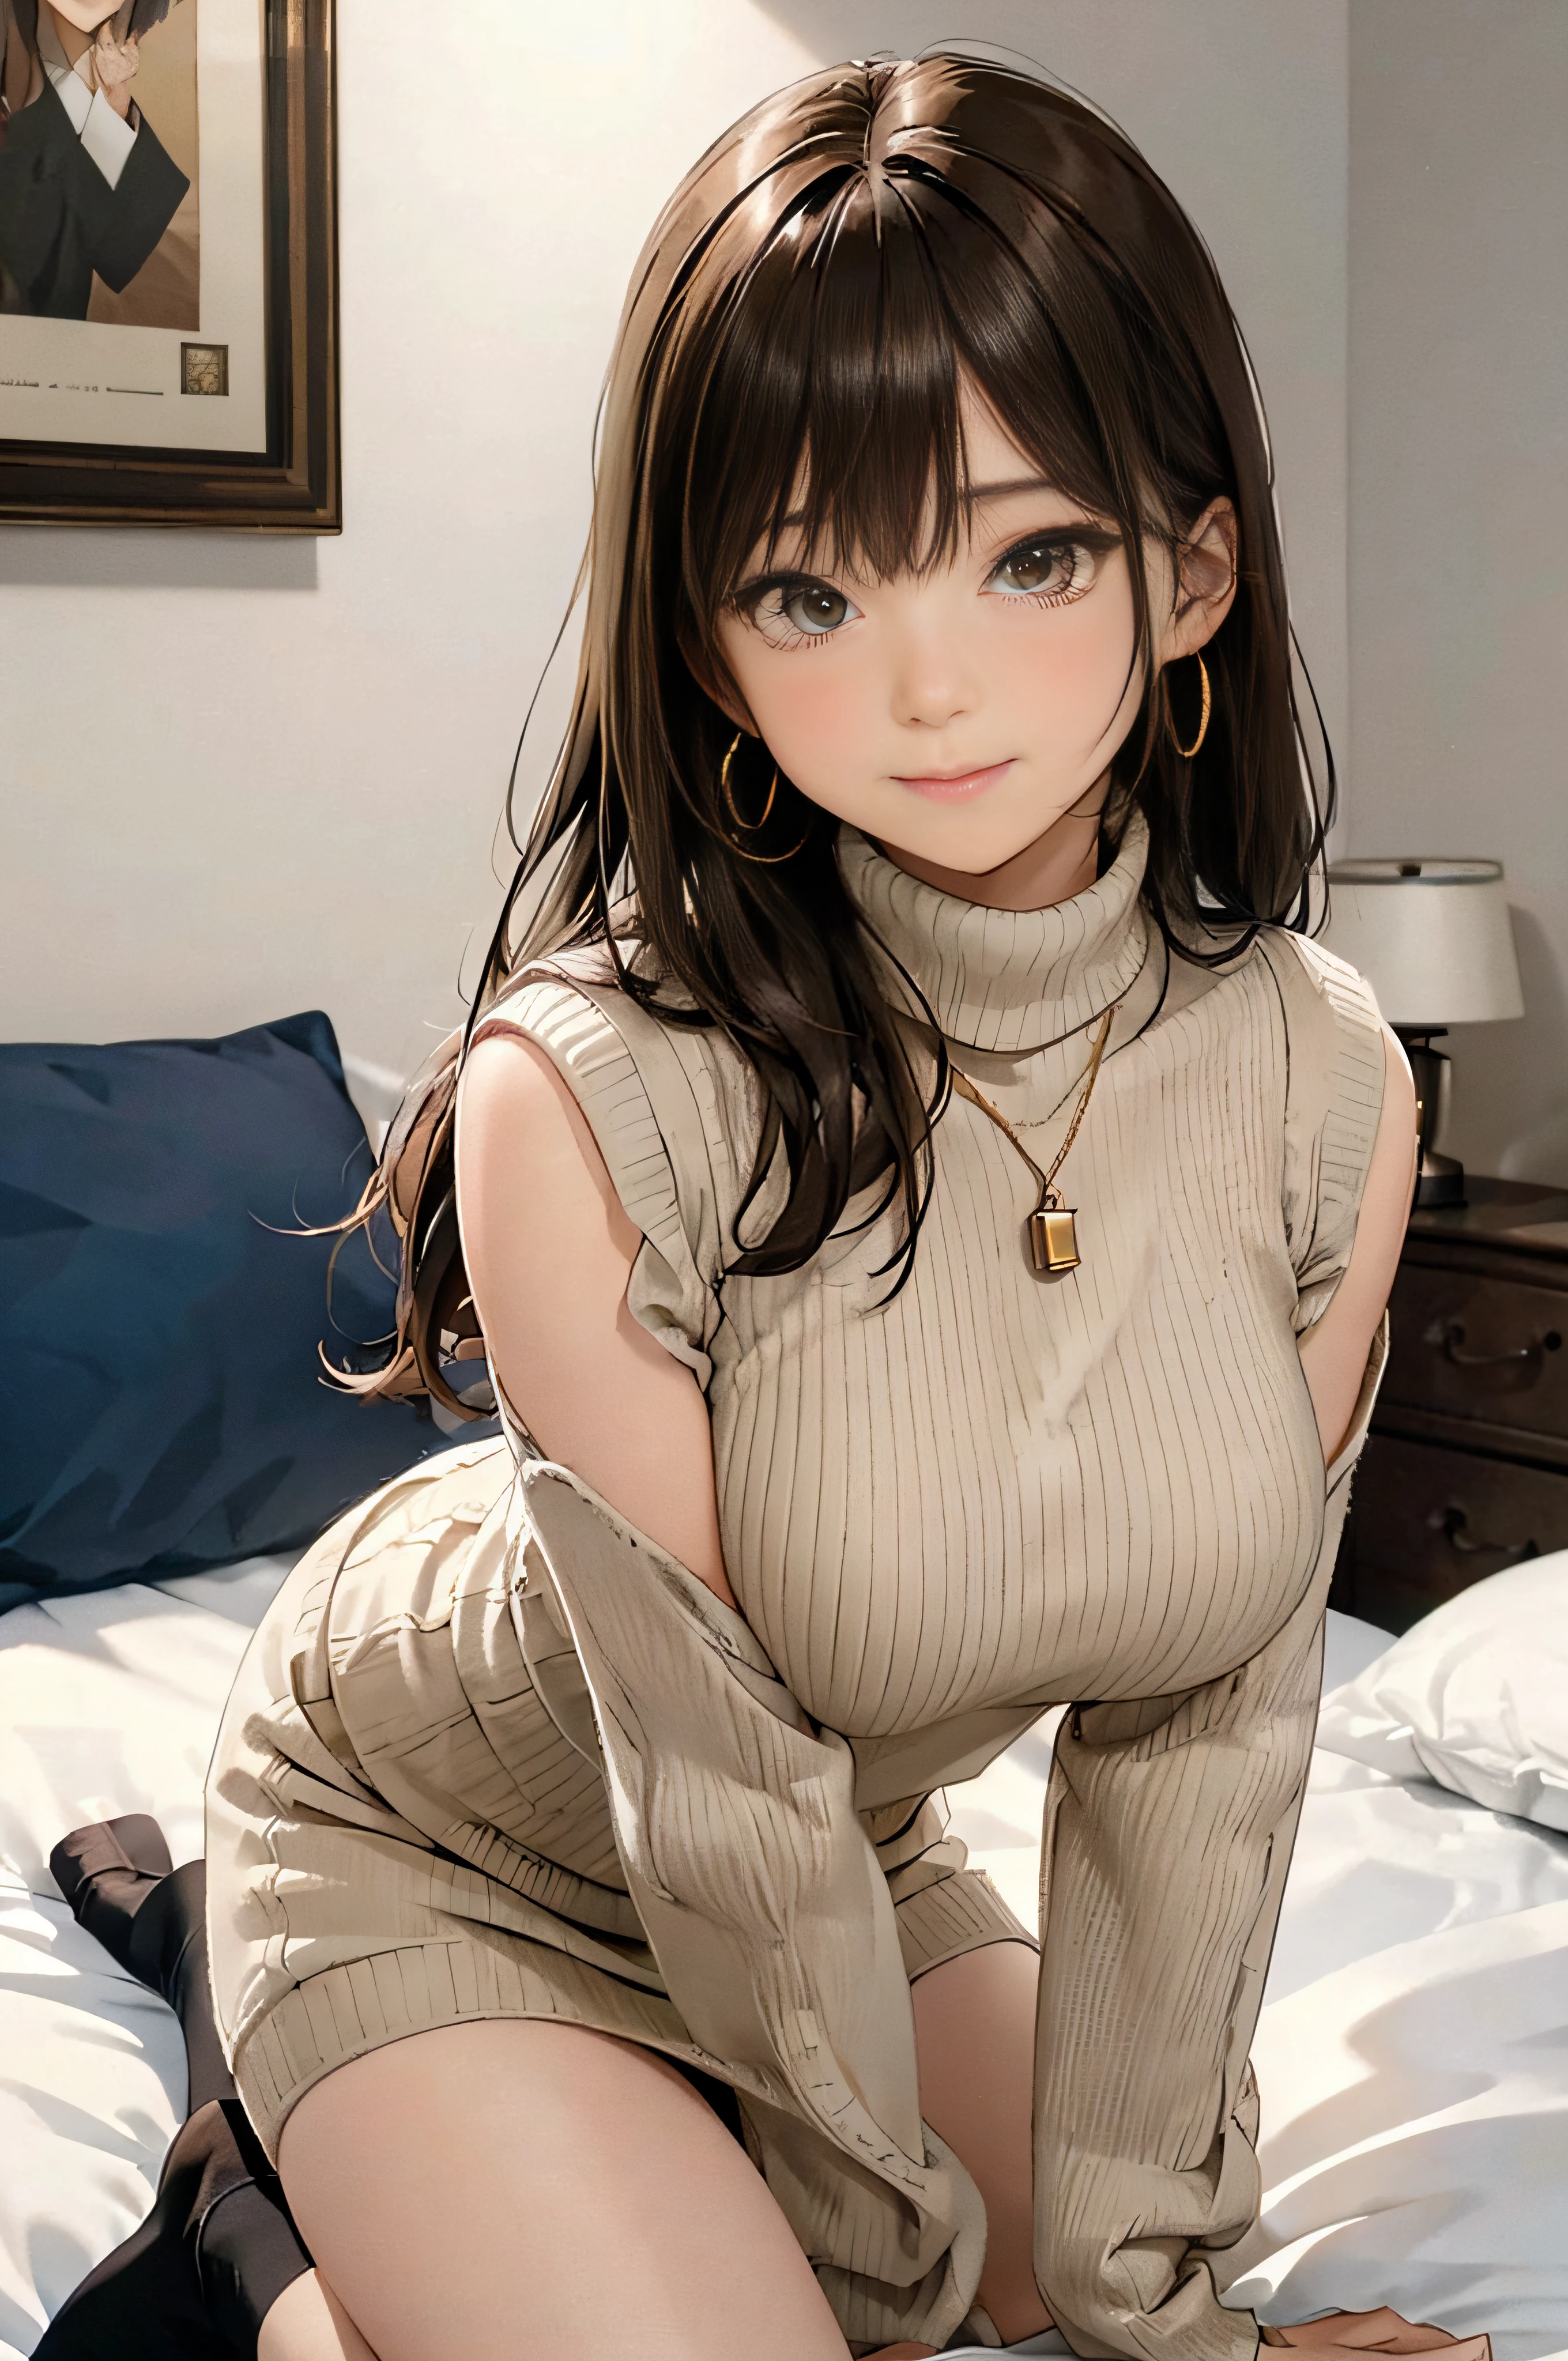 (Light Beige Turtleneck Sleeveless Knit、pencil skirts、knee high stockings)、20 year old girl, breasts of medium size,, Puffy nipple、brown haired、Long Wave Hair、hotels room、(Sleeping on the bed)、((Pleasant look、Open your mouth a little))、a necklace、Earring、 (Very detailed), Shy smile、(Kamimei)、(Perfectly detailed face)、full body seen、(Hide your chest with your hands)